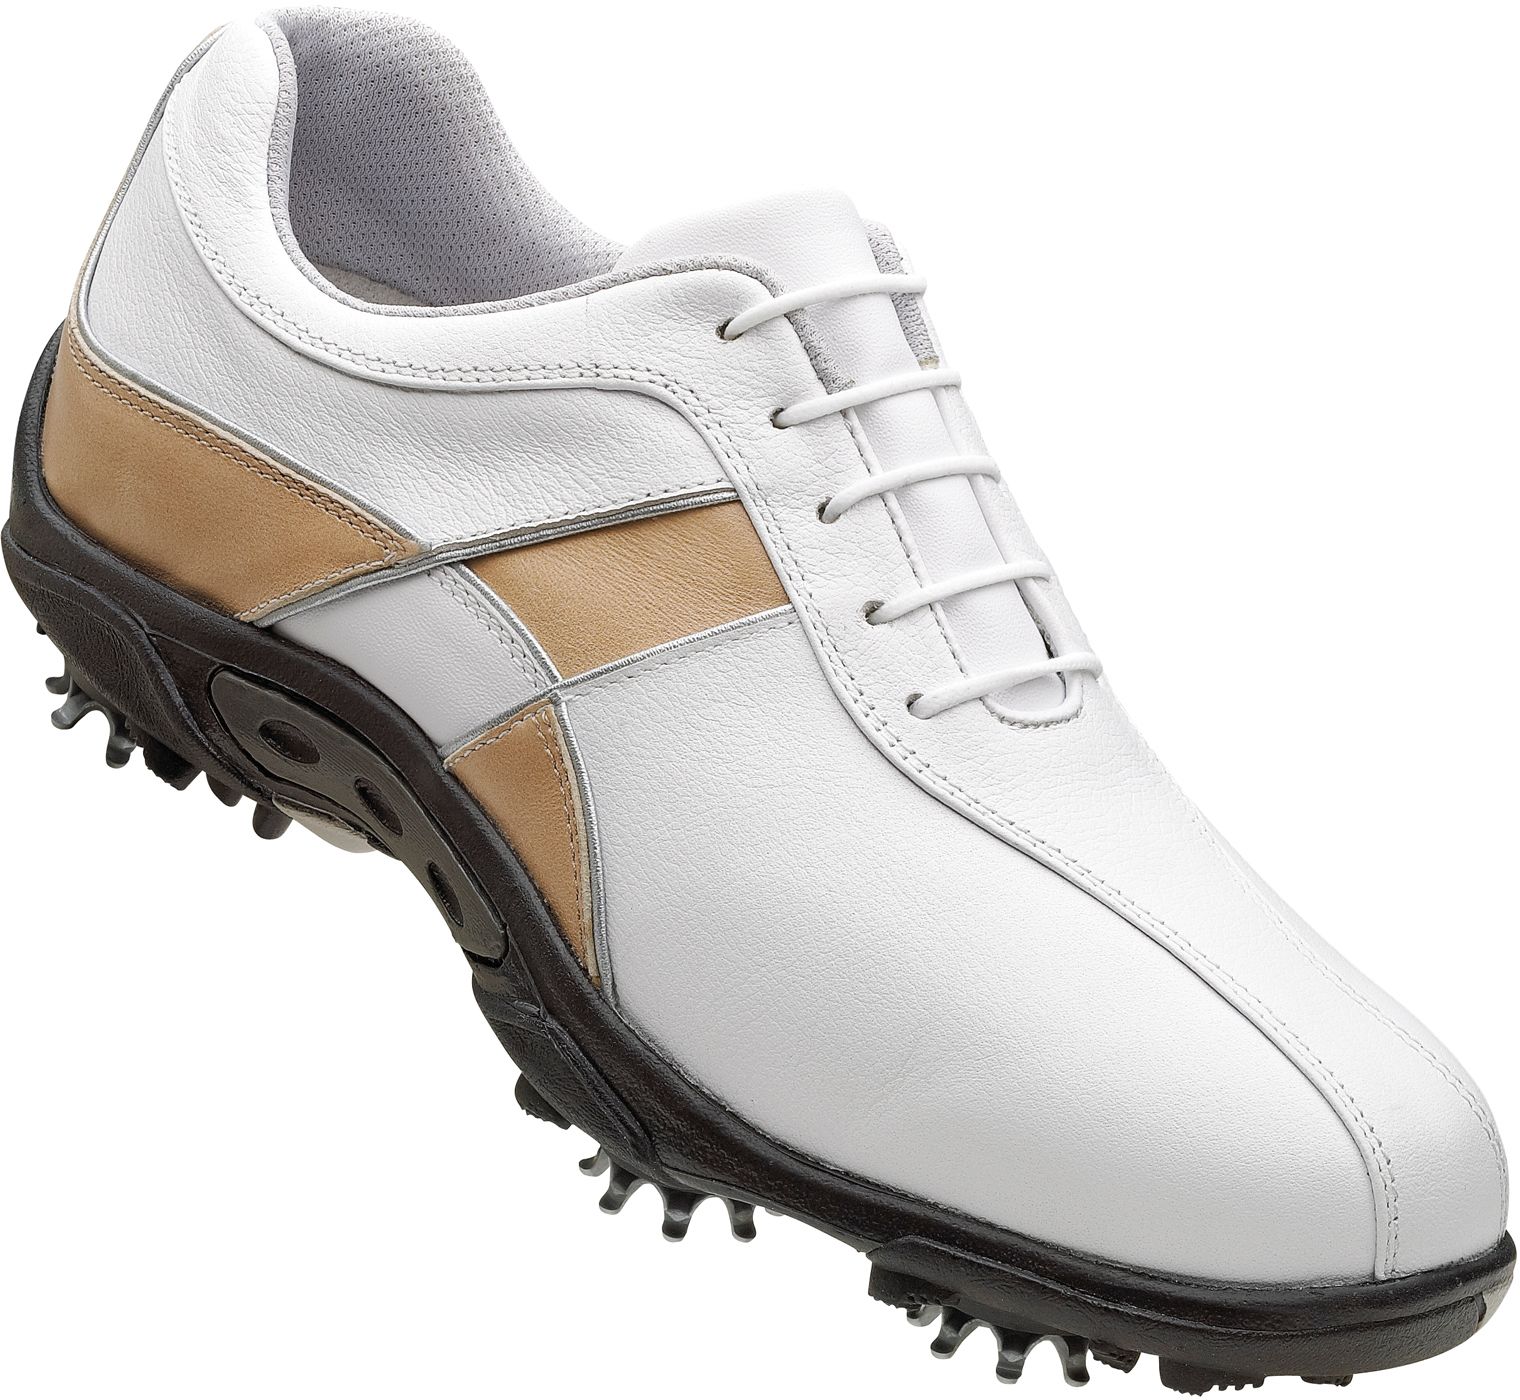 Summer Shoe Sale on Footjoy Women S Summer Series Golf Shoe   White Smooth Taupe